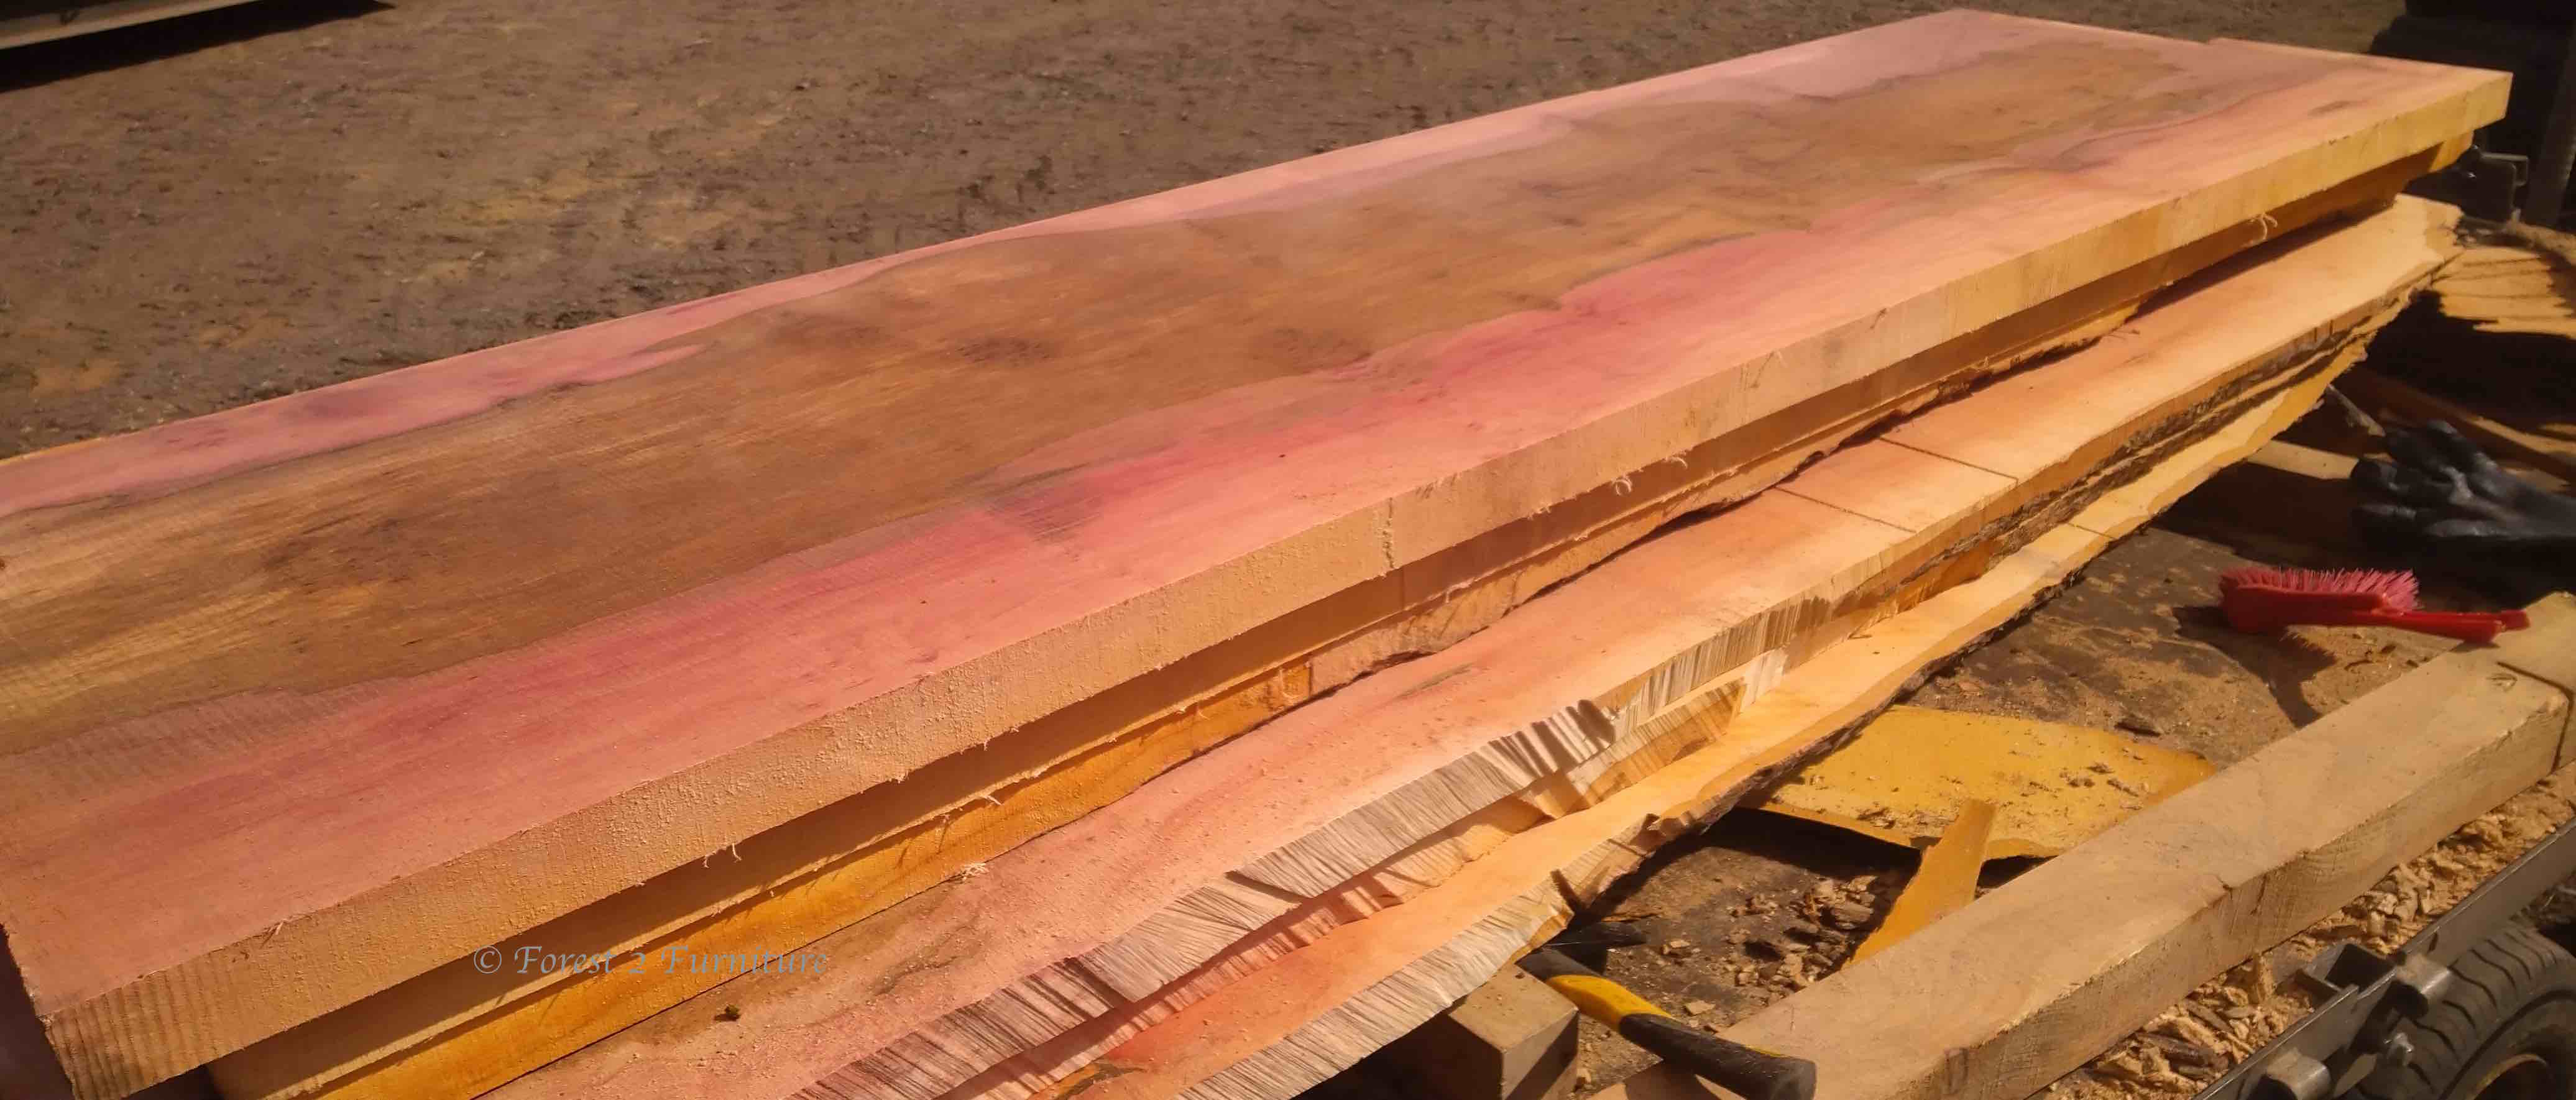 Once dry these boards, which measure 2" x 24" x 8' will be perfect for table or work-surface tops